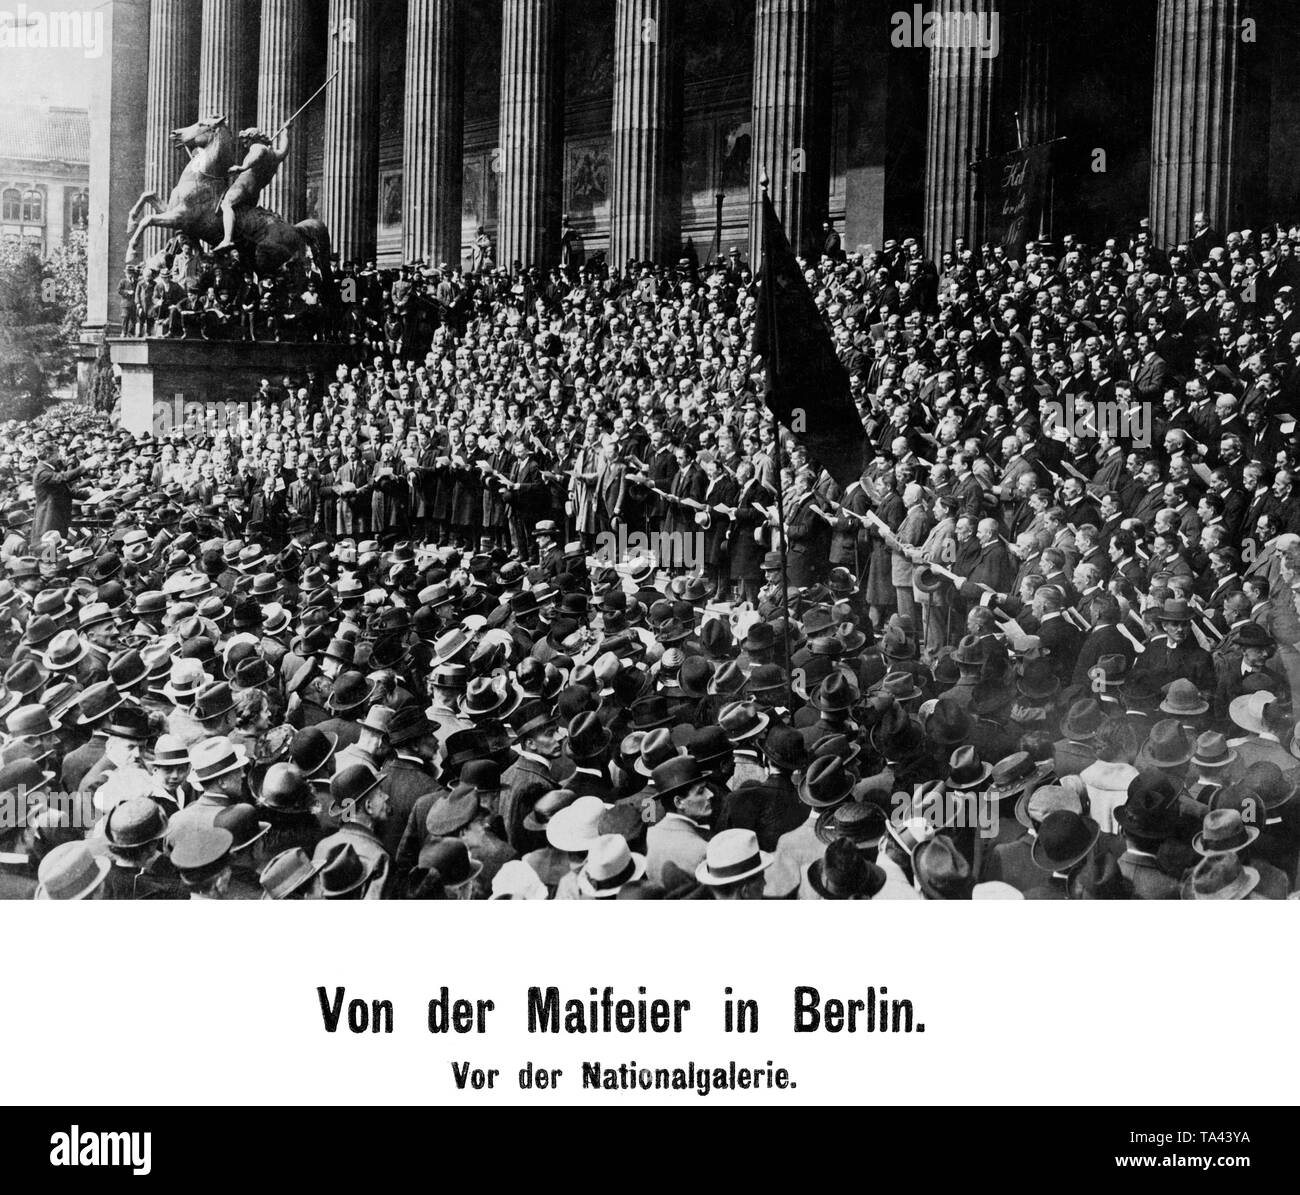 Workers gather on the occasion of May 1 in front of the National Gallery in Berlin. Stock Photo